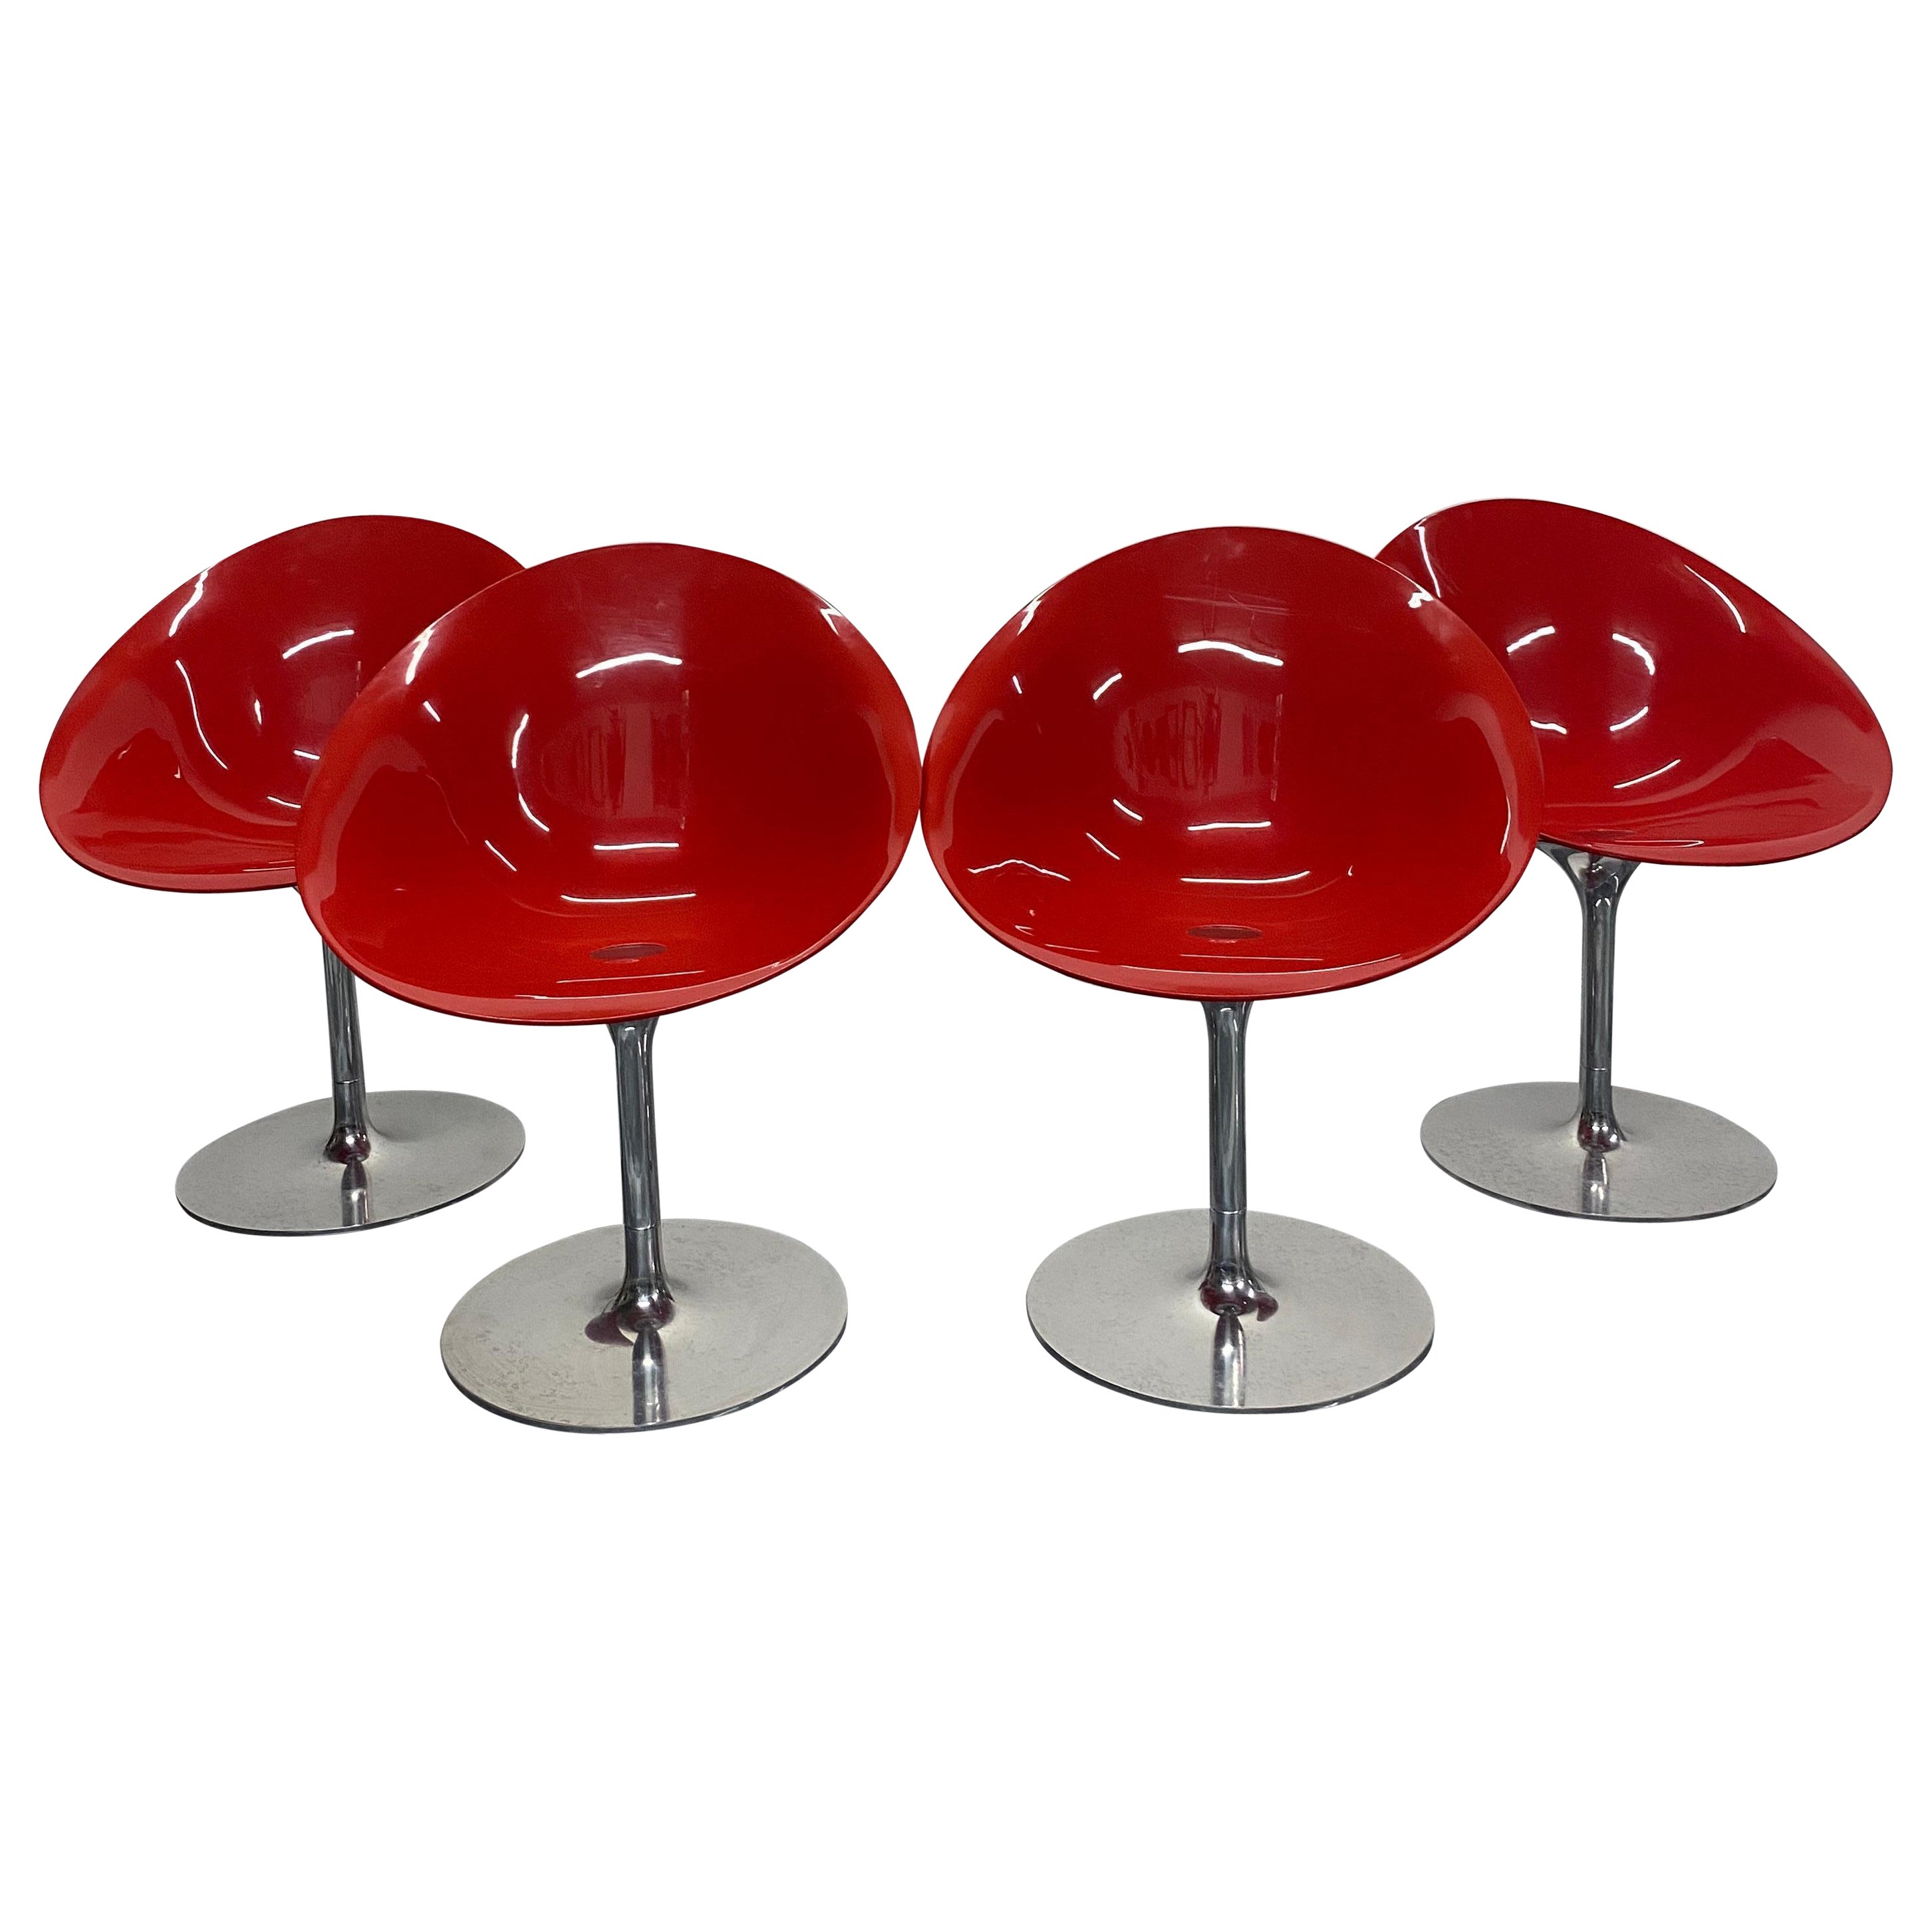 Philippe Starck Red “Eros” Chairs on Aluminum Bases for Kartell